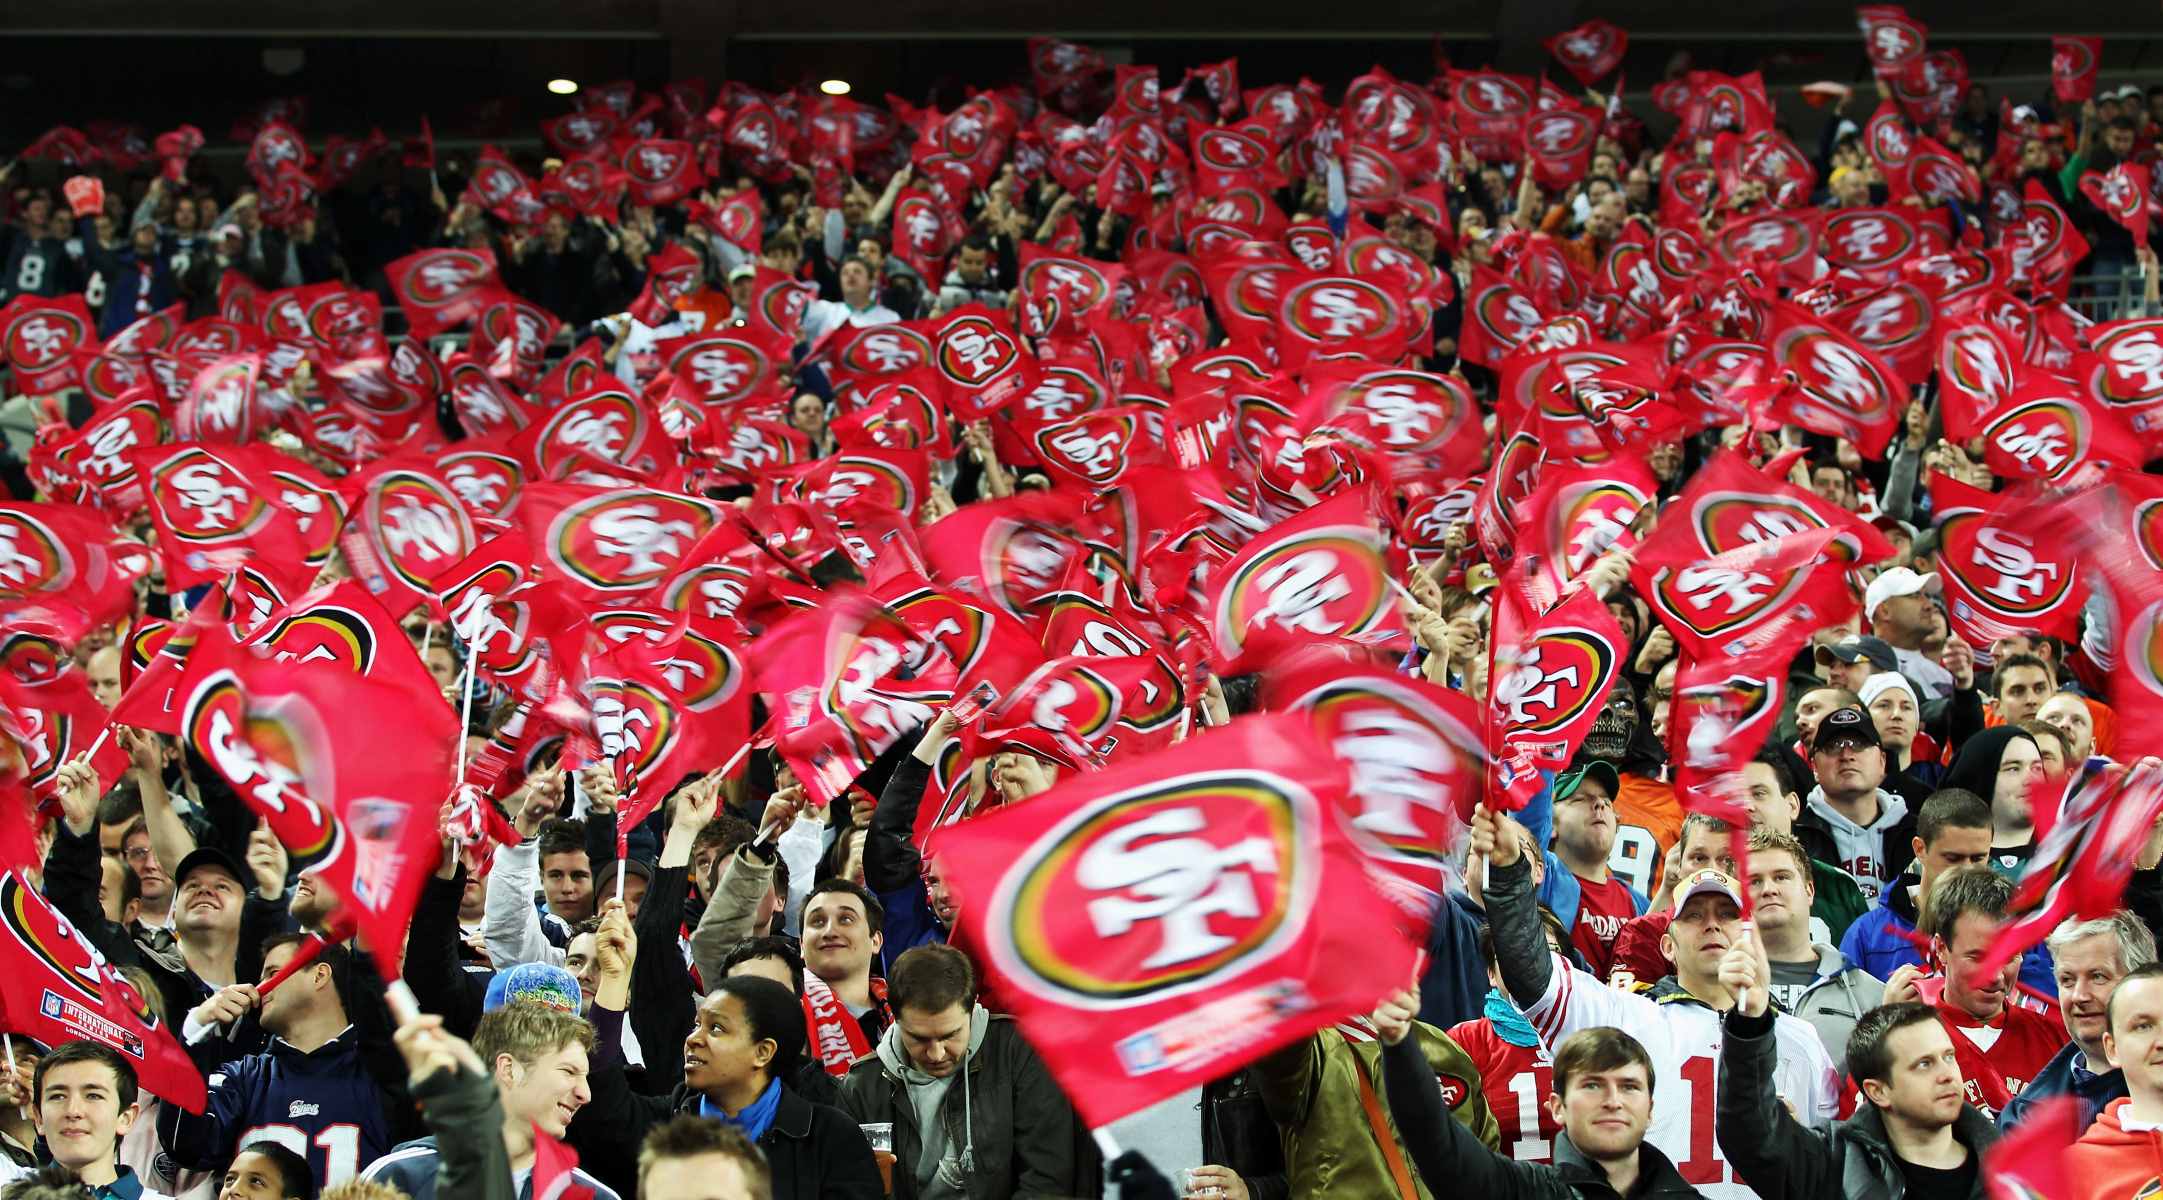 Horrific Incident At Giants Game: 49ers Fan Pulls Woman’s Hair